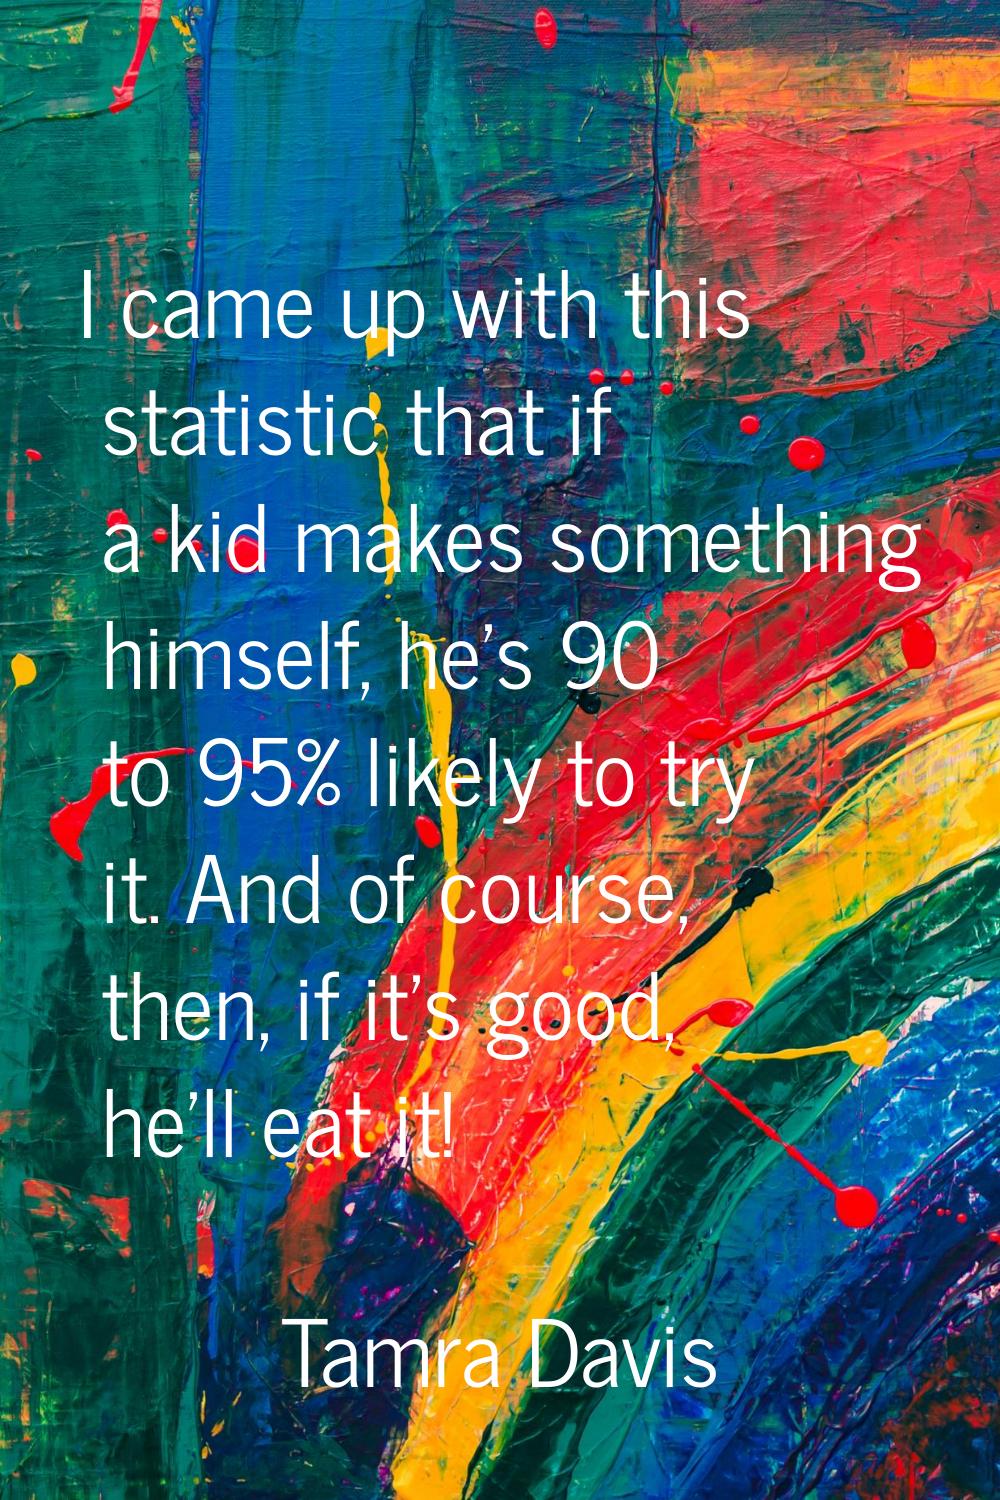 I came up with this statistic that if a kid makes something himself, he's 90 to 95% likely to try i